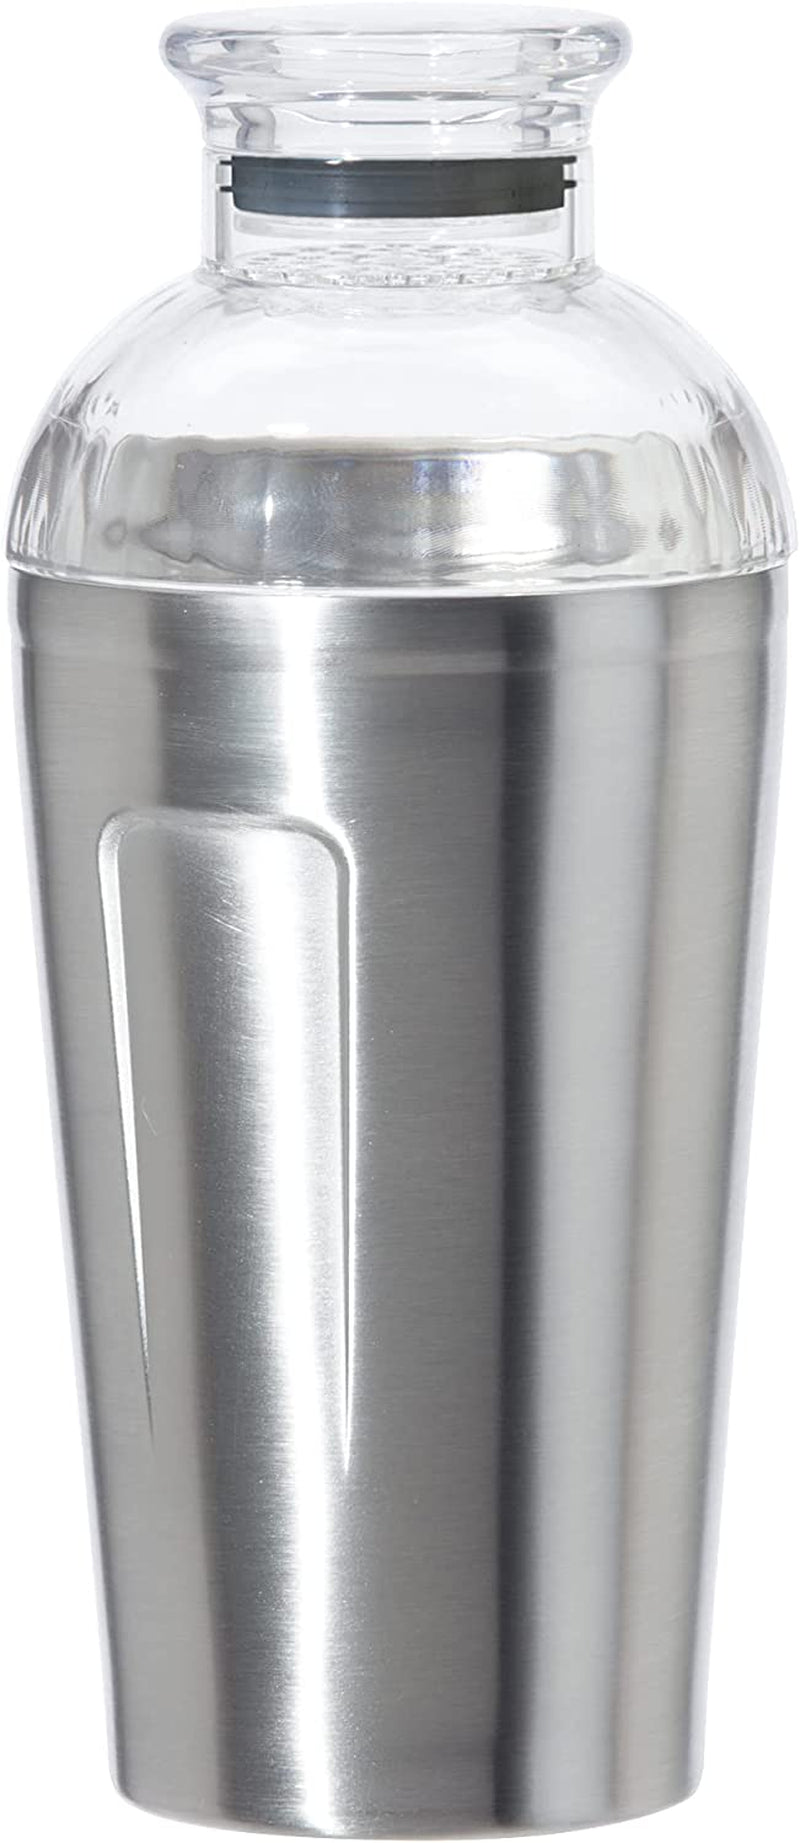 Oggi Groove Insulated Cocktail Shaker-17Oz Double Wall Vacuum Insulated Stainless Steel Shaker, Tritan Lid Has Built in Strainer, Ideal Cocktail, Martini Shaker, Margarita Shaker, Gold (7404.4) Home & Garden > Kitchen & Dining > Barware Oggi Stainless Steel 17-Ounce 